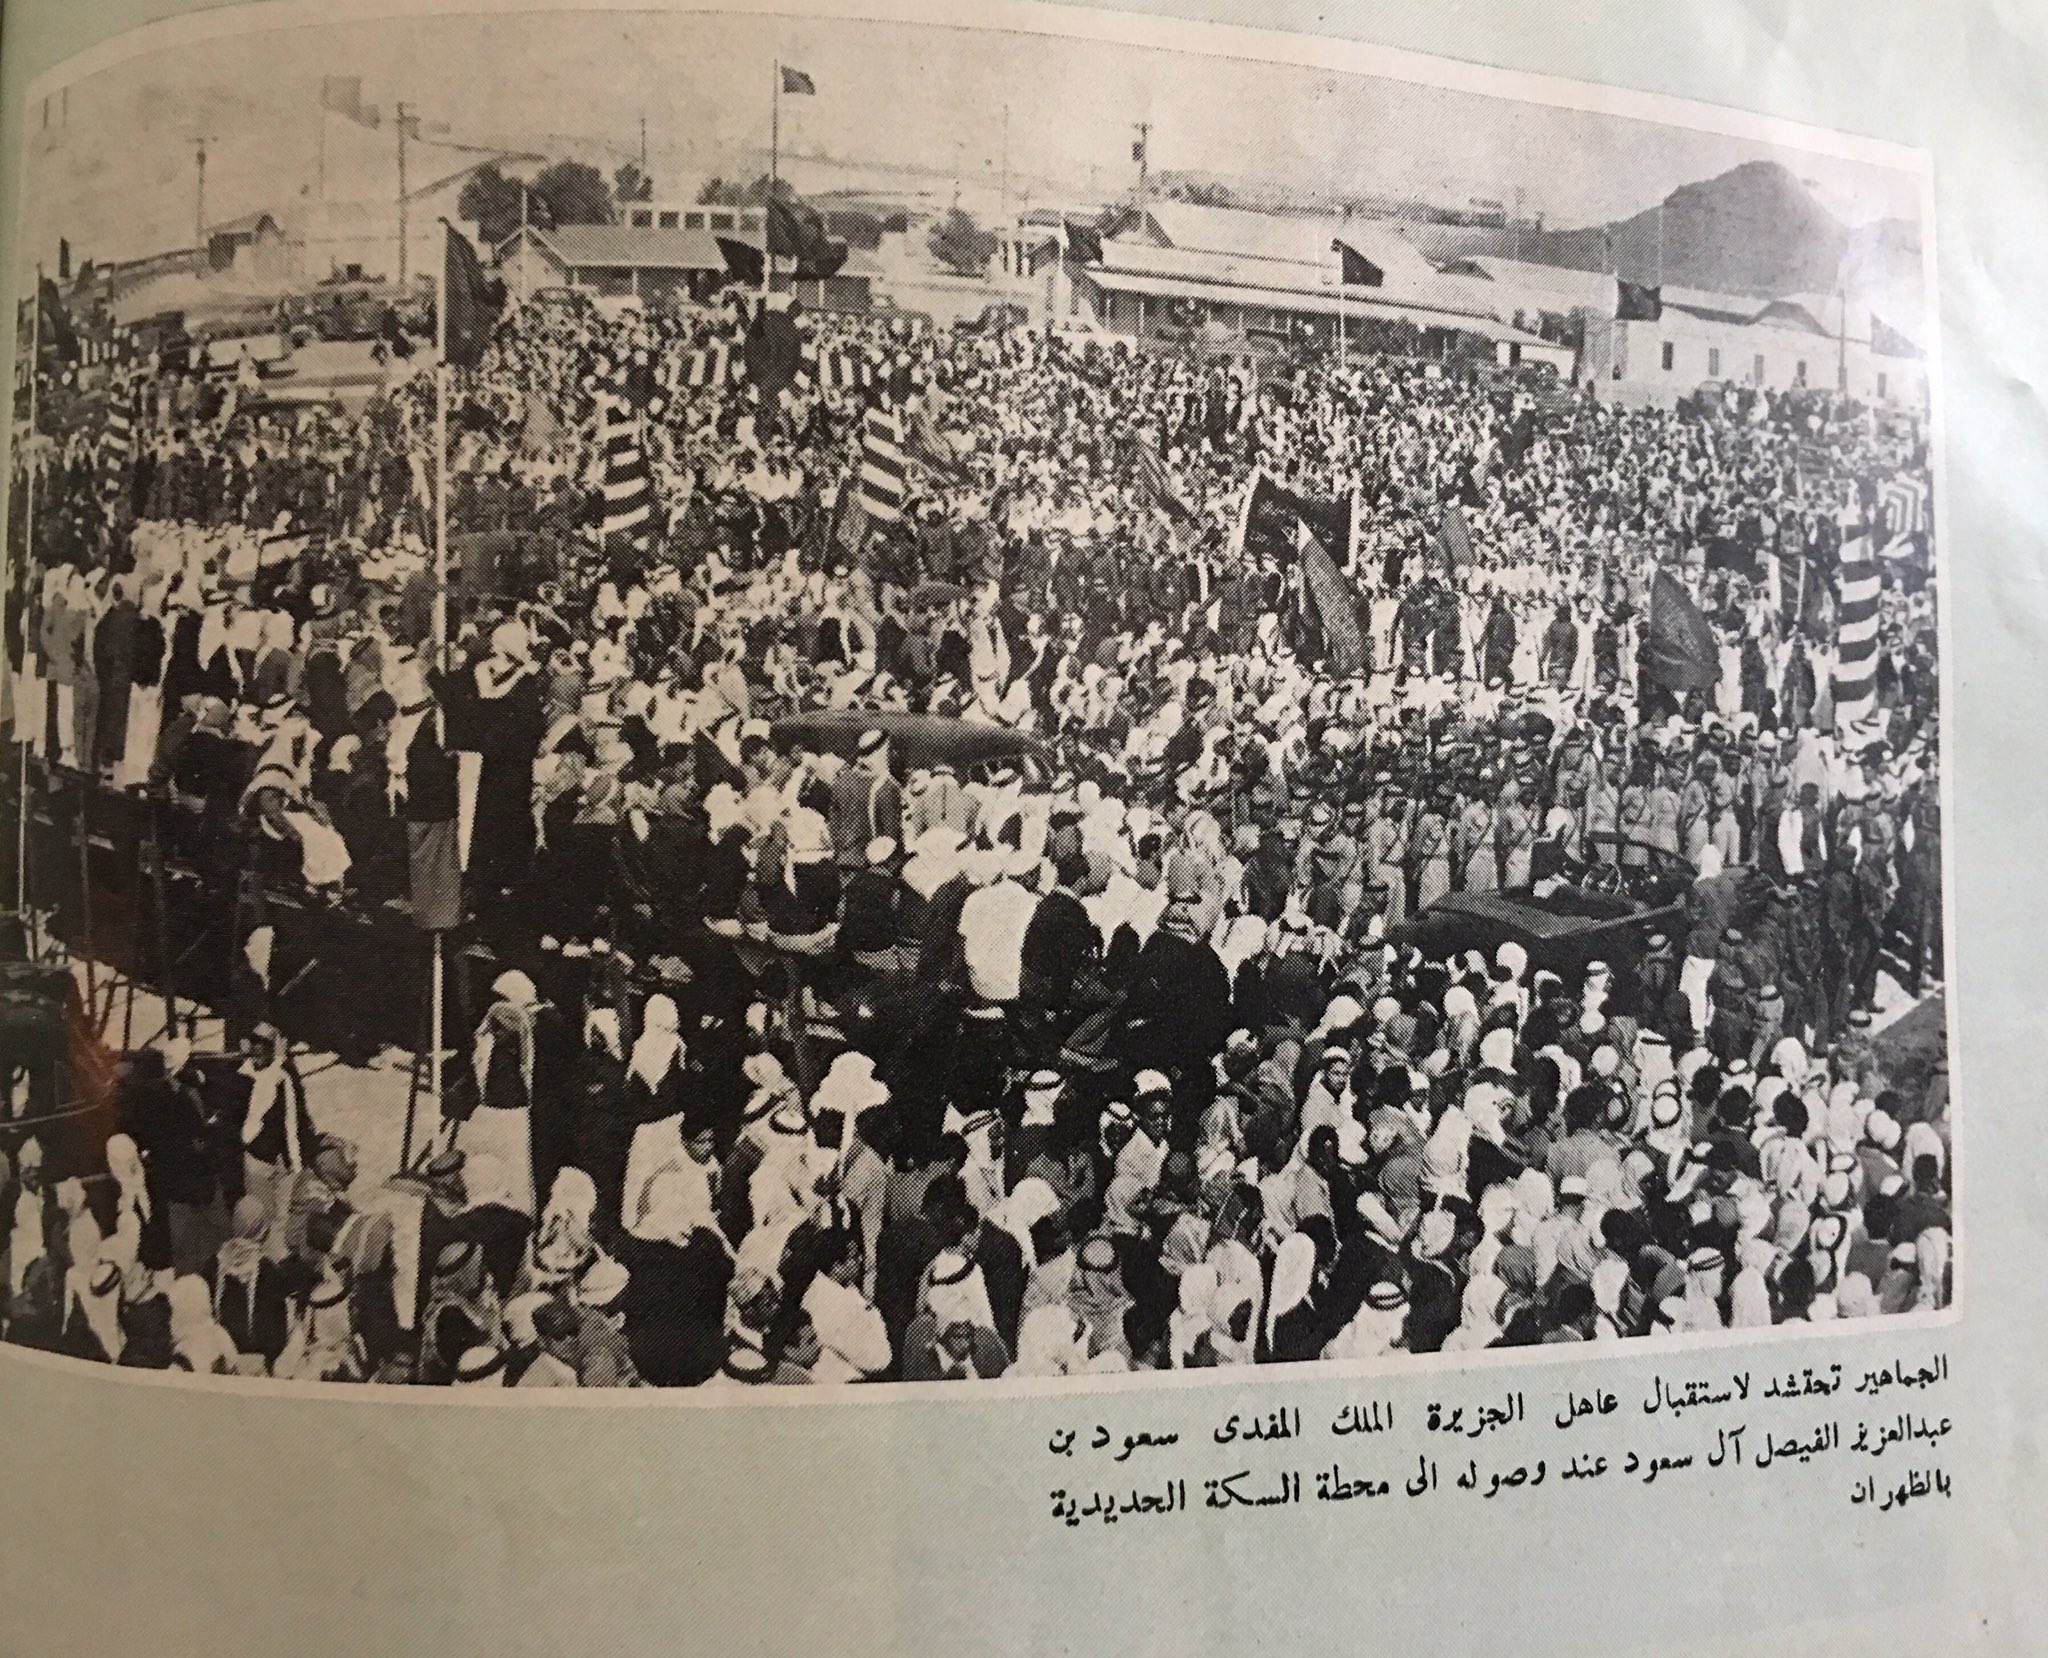 King Saud was recieved by the railway team in Dhahran - 1954